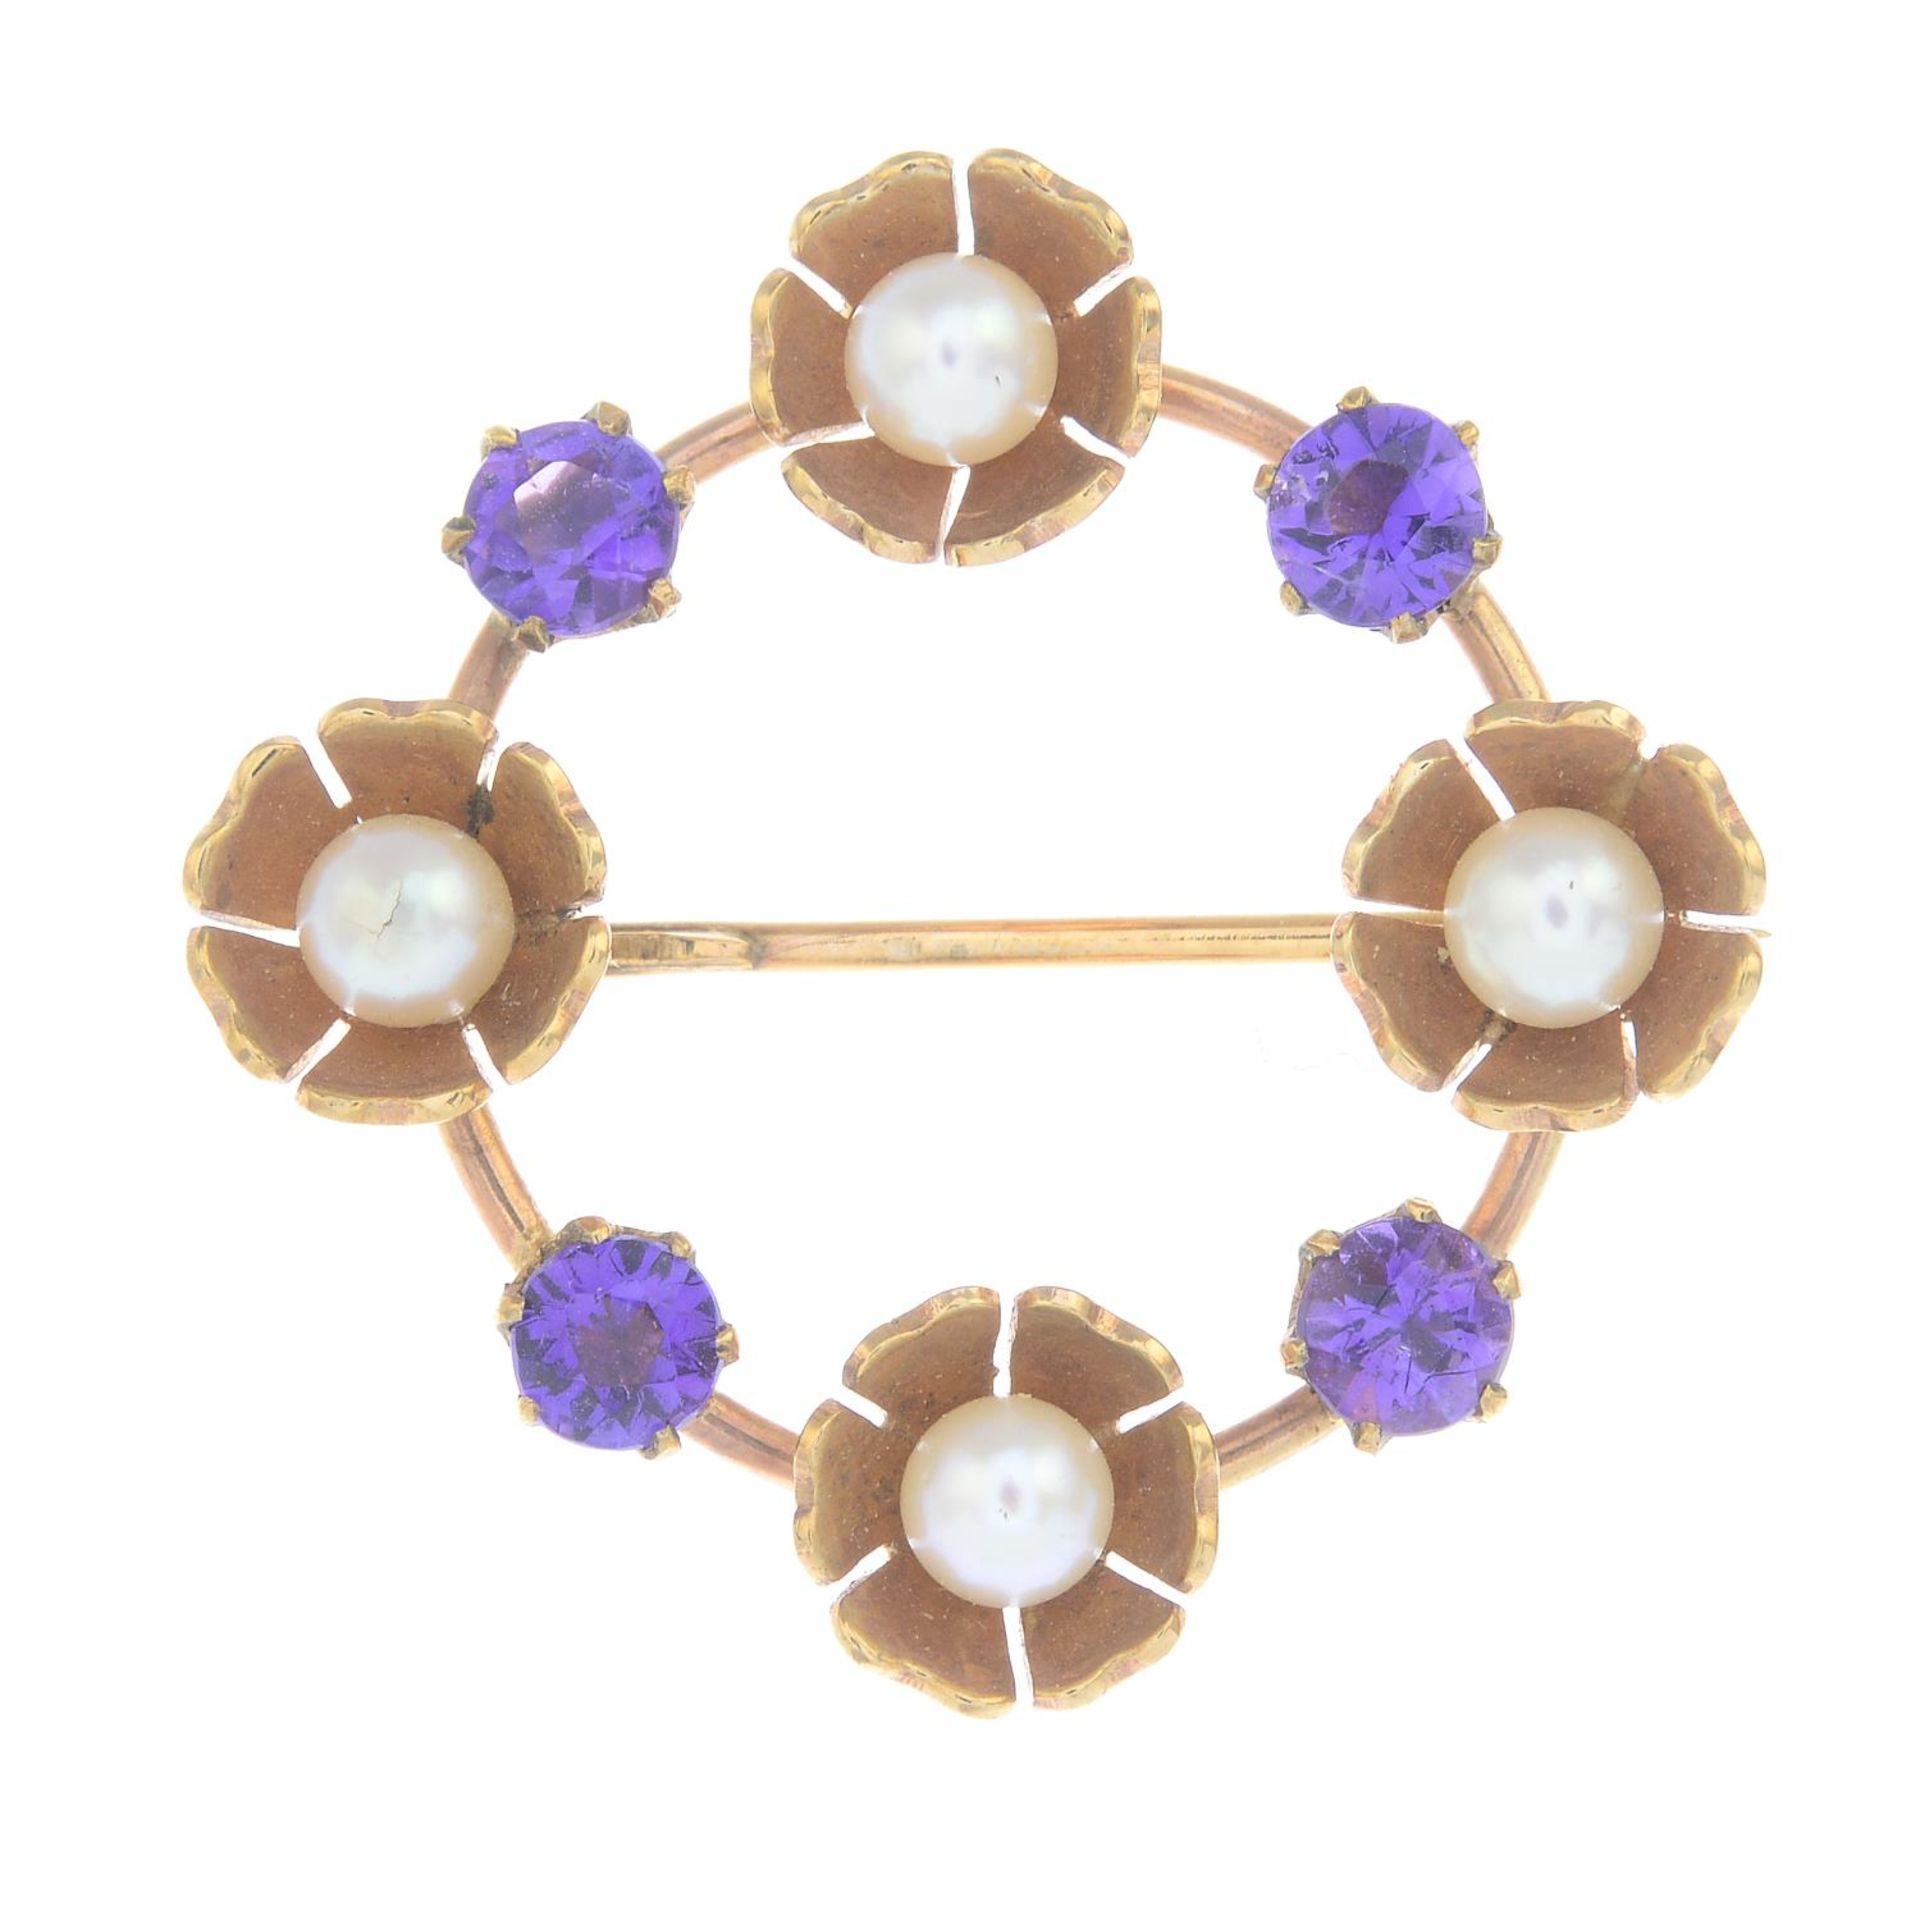 An early 20th century 9ct gold amethyst and cultured pearl wreath brooch.Stamped 9CT.